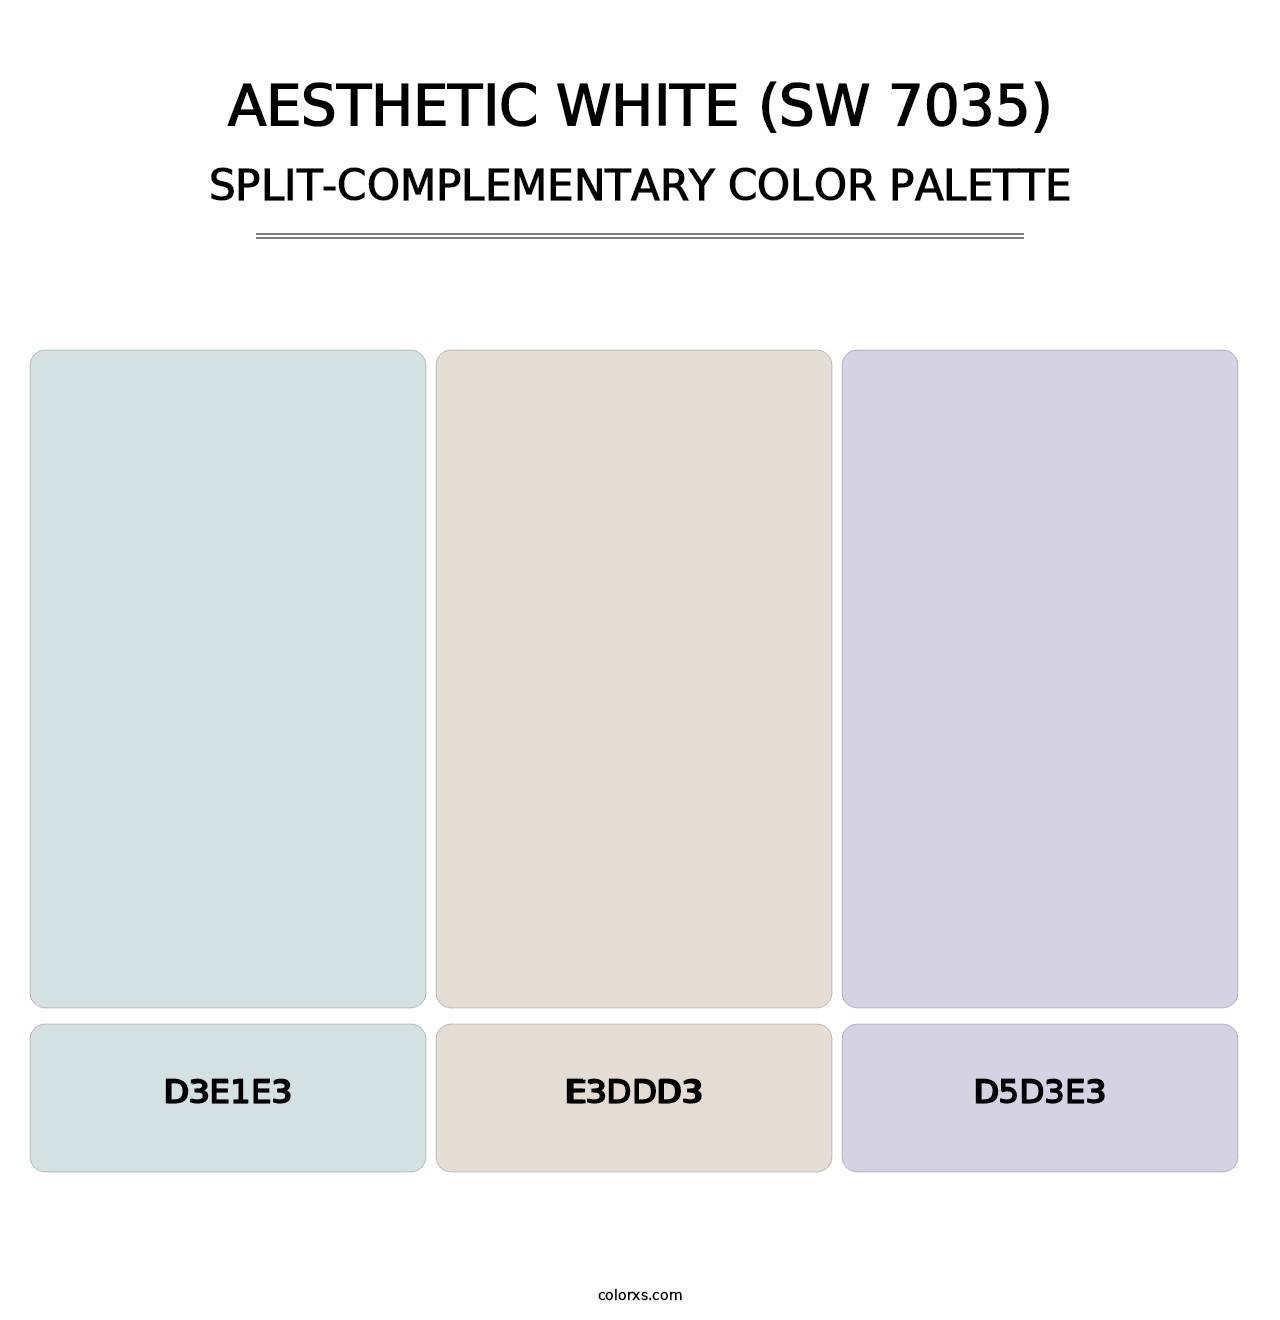 Aesthetic White (SW 7035) - Split-Complementary Color Palette